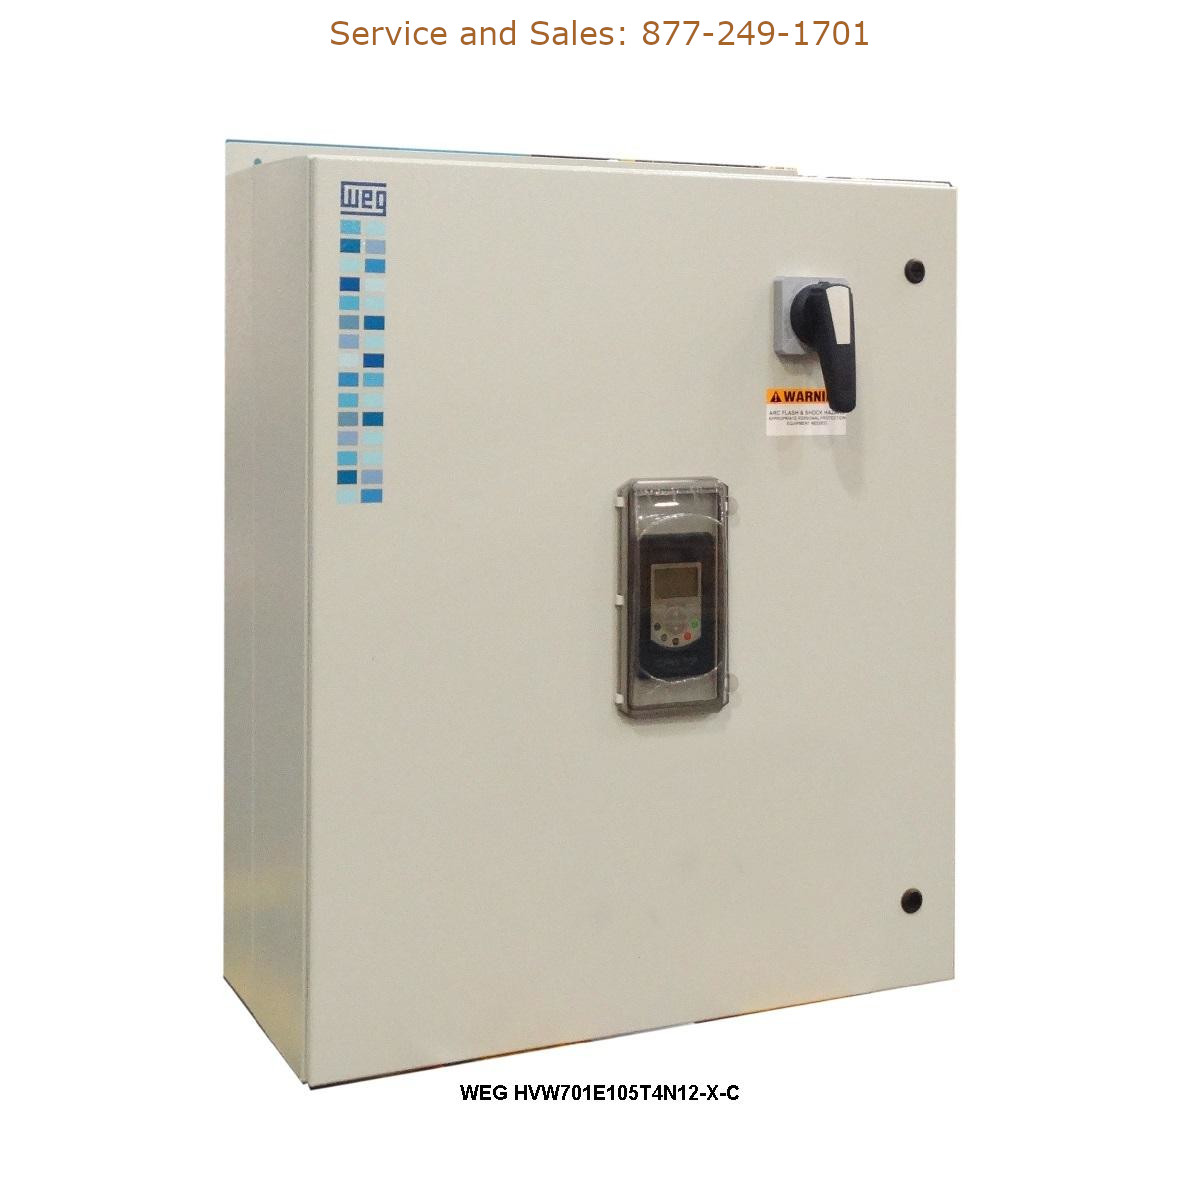 WEG HVW701E105T4N12-X-C WEG Model Number HVW701E105T4N12-X-C WEG Drives, Variable Speed Drives Repair Service, Troubleshooting, Replacement Parts https://gesrepair.com/wp-content/uploads/2022/WEG/WEG_HVW701E105T4N12-X-C_Drives_Variable_Speed_Drives.jpg